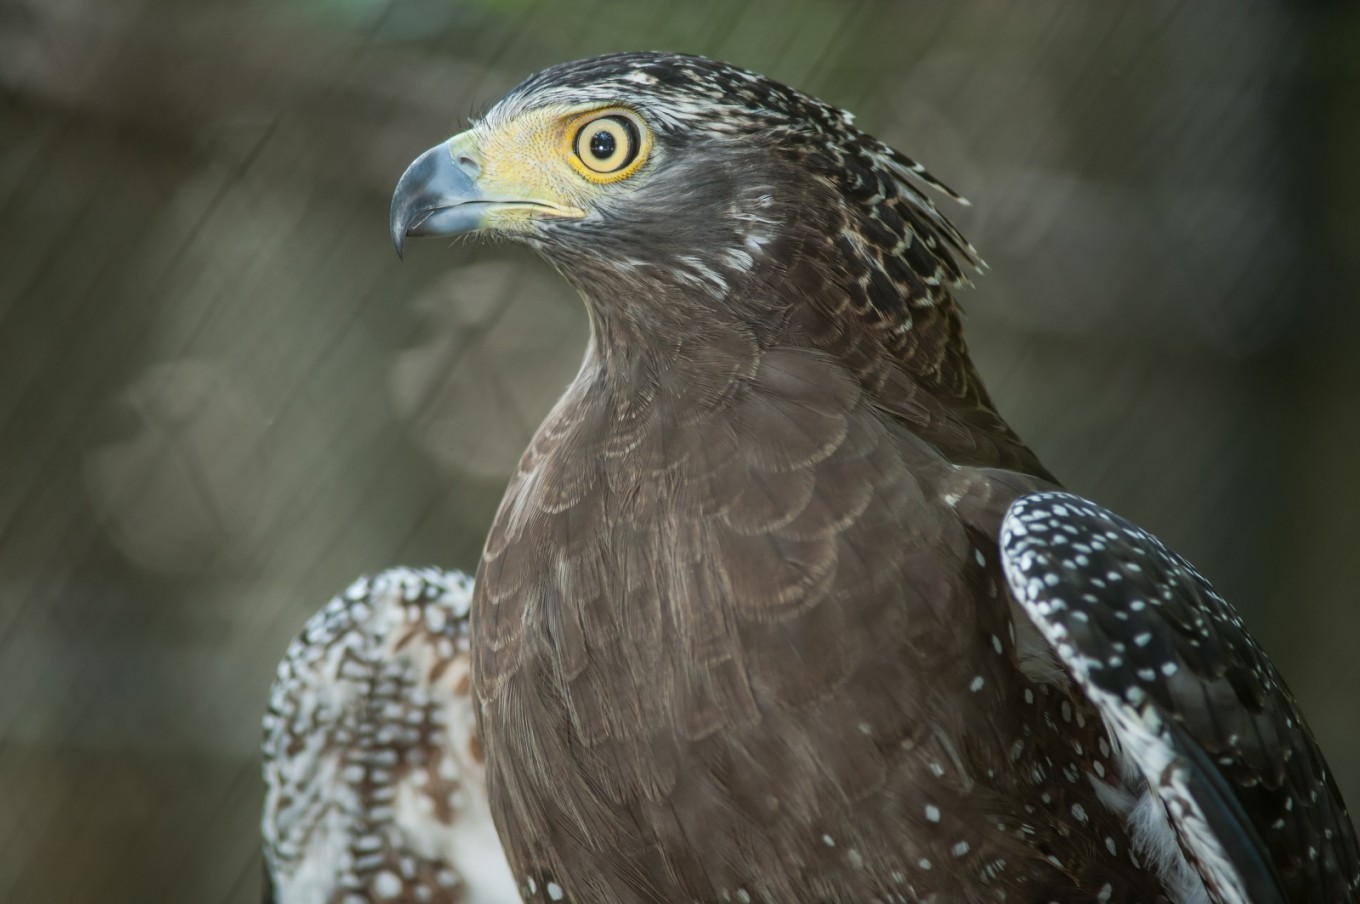 Yogyakarta BKSDA release two crested serpent eagles into wild